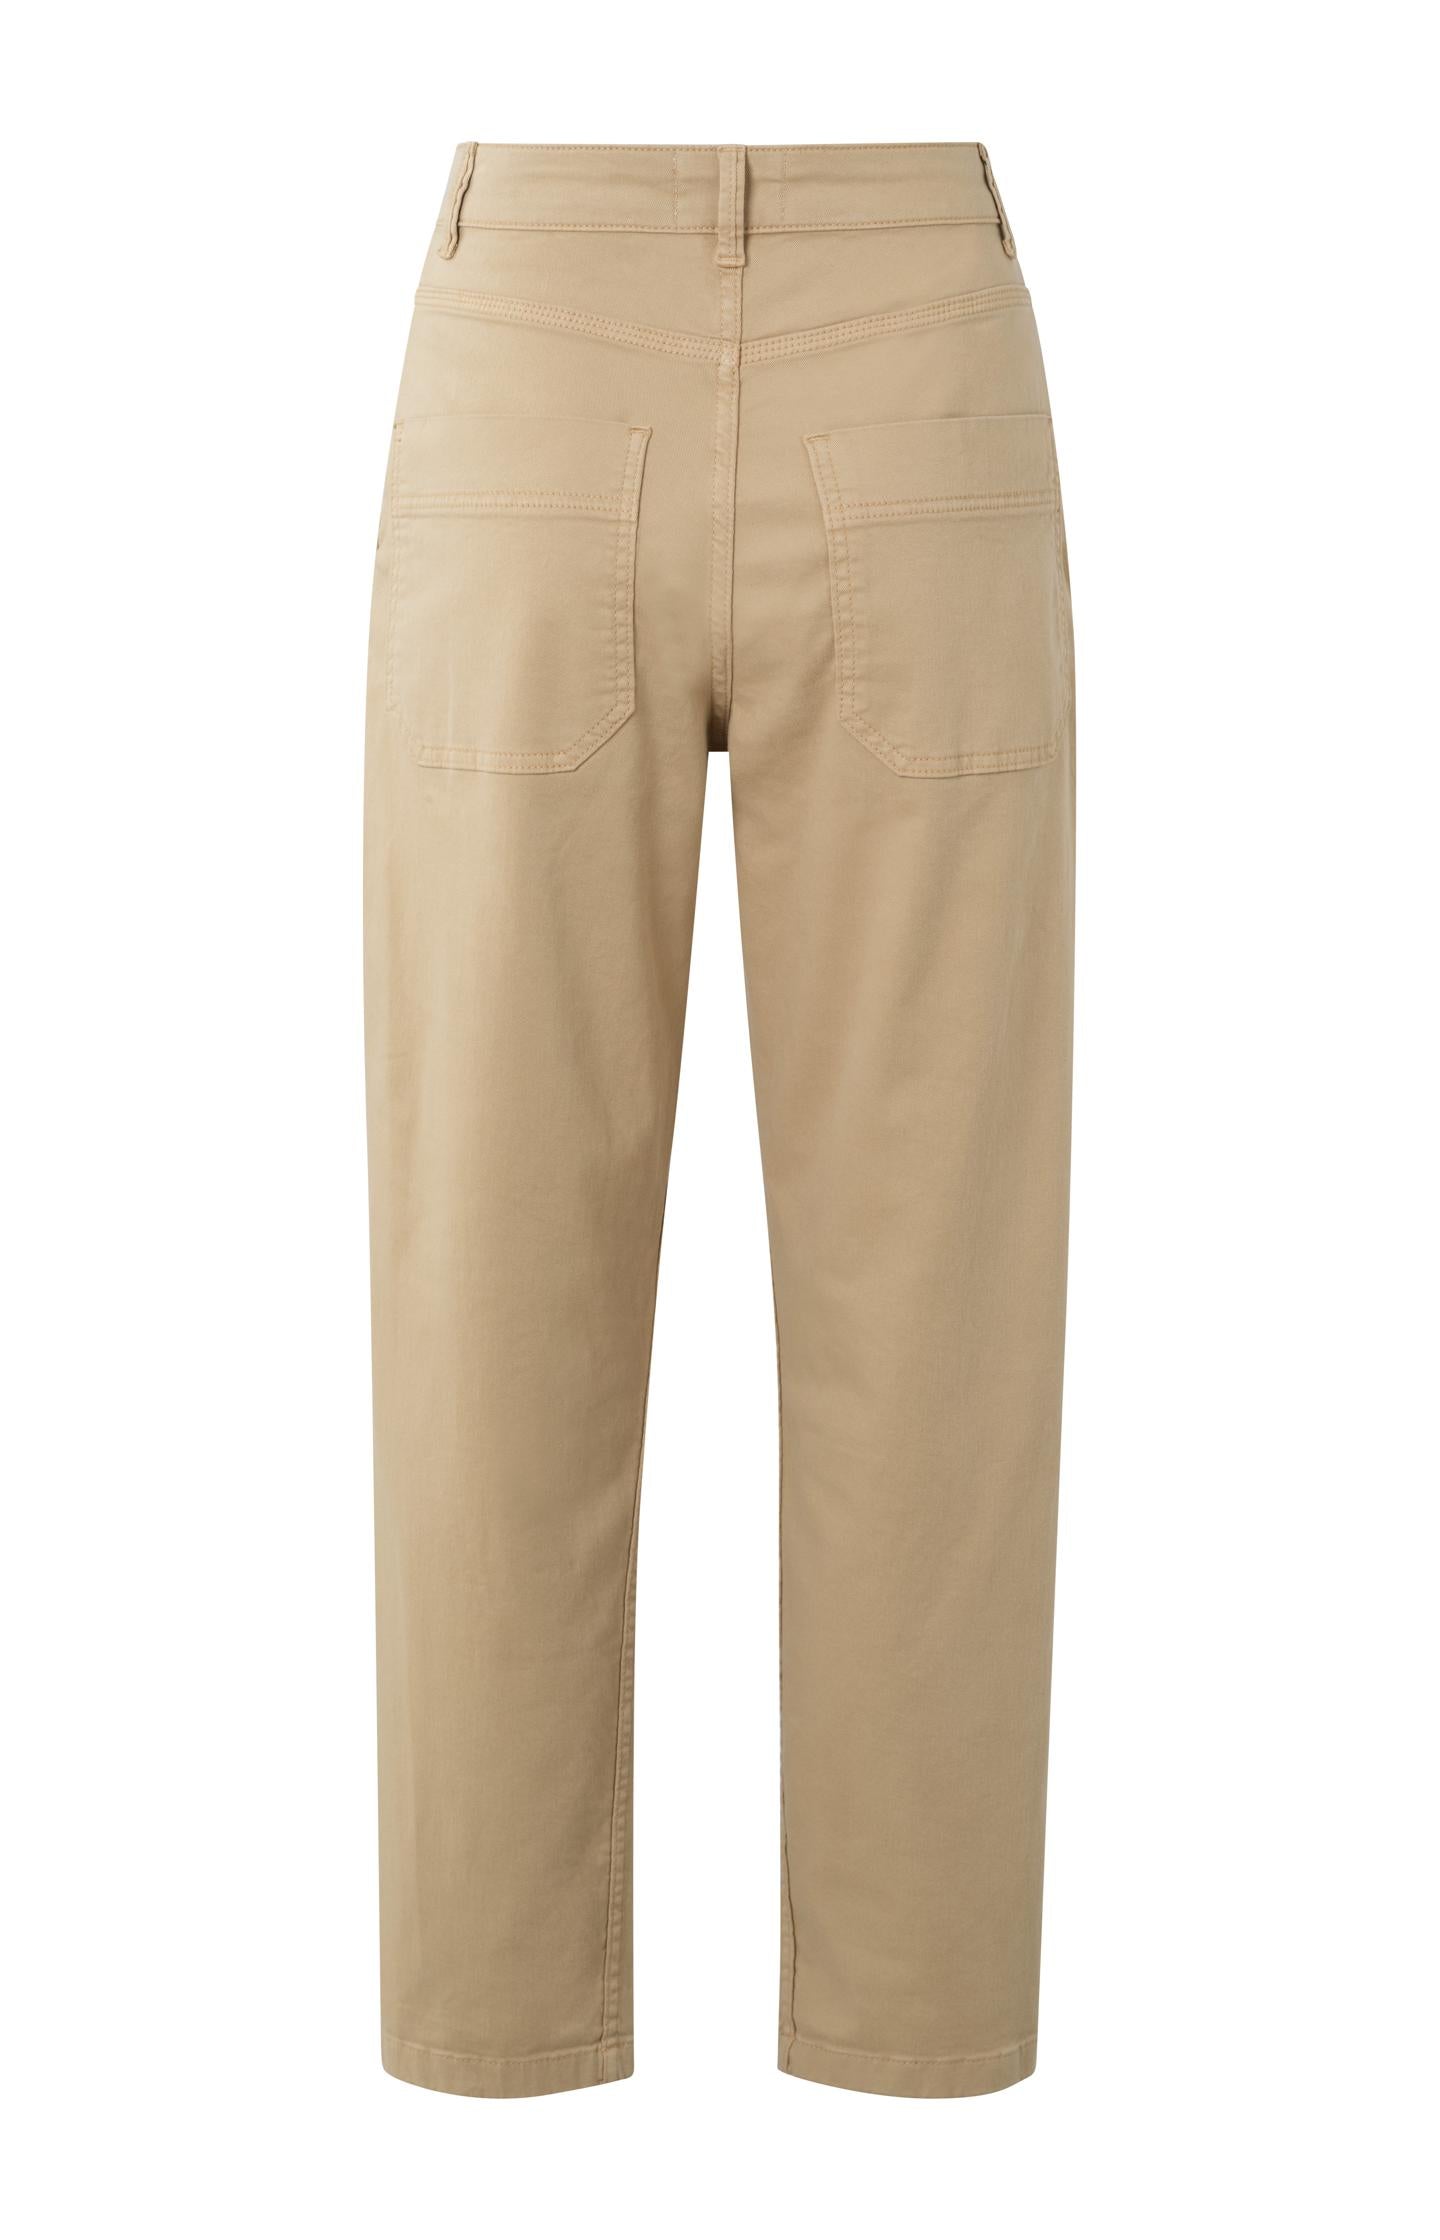 Cargo trousers with pockets and a zip fly in loose fit